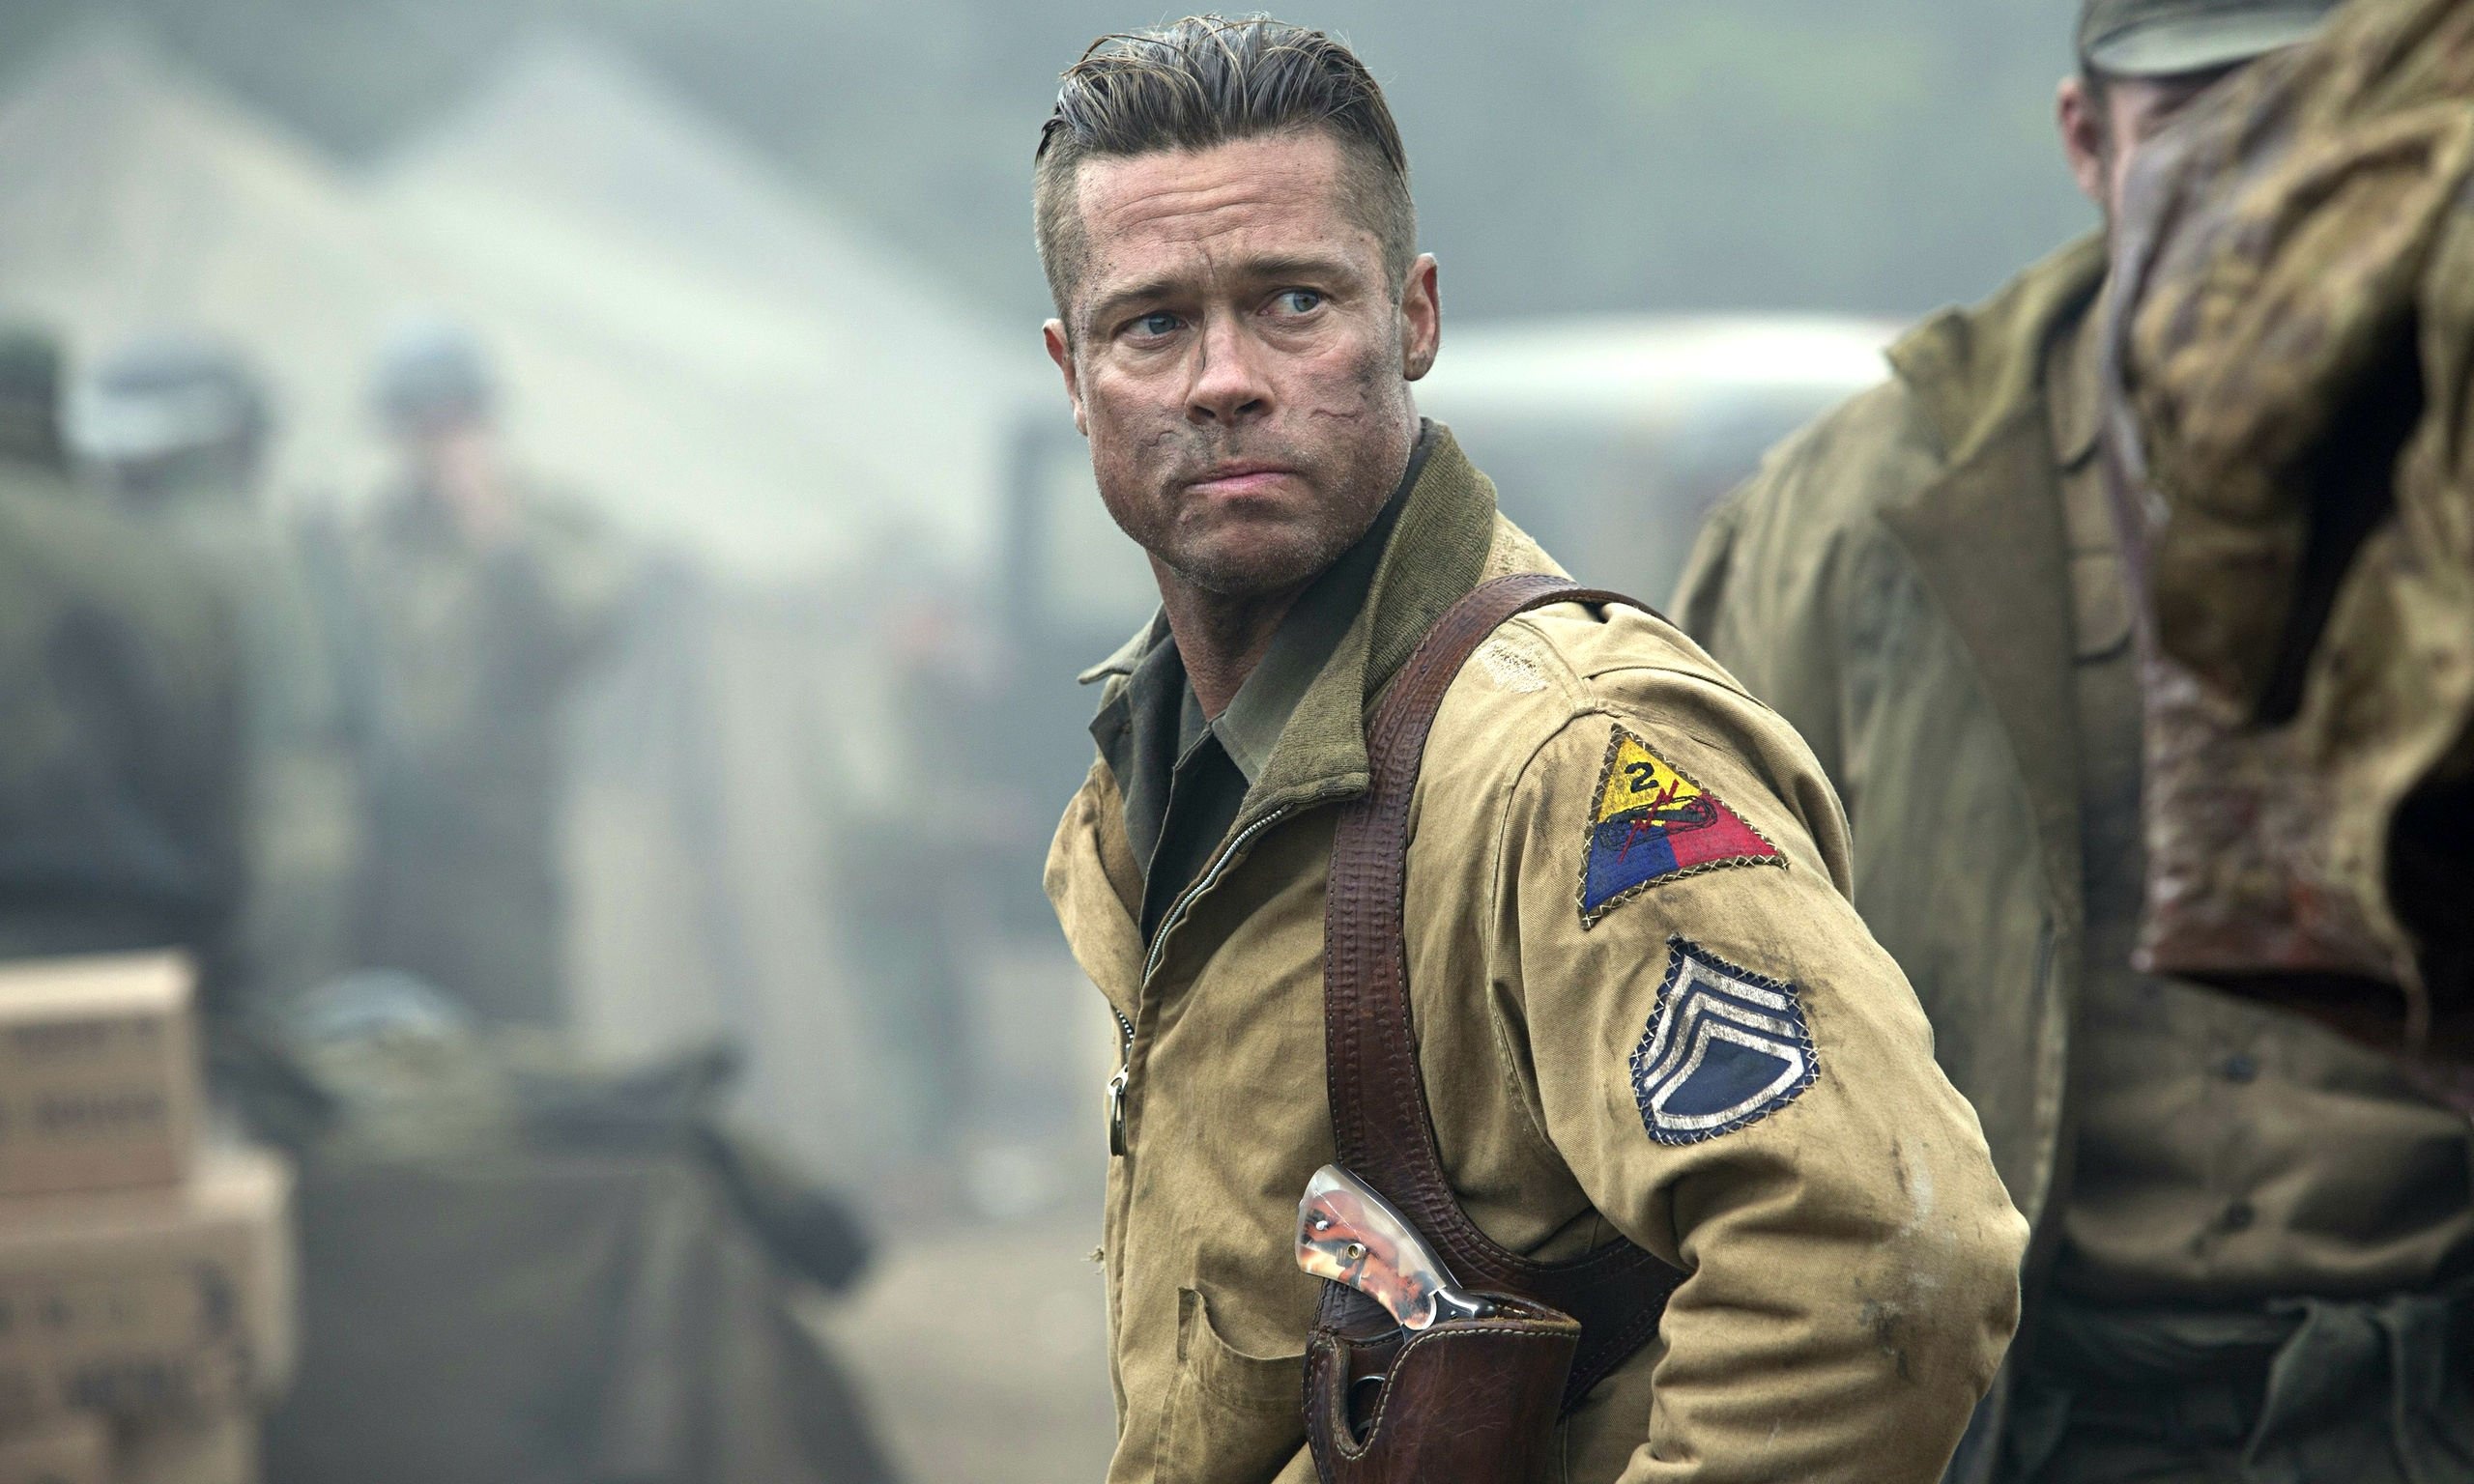 Brad Pitt: Don "Wardaddy" Collier, One of the main protagonists that appear in the movie Fury. 2560x1540 HD Wallpaper.